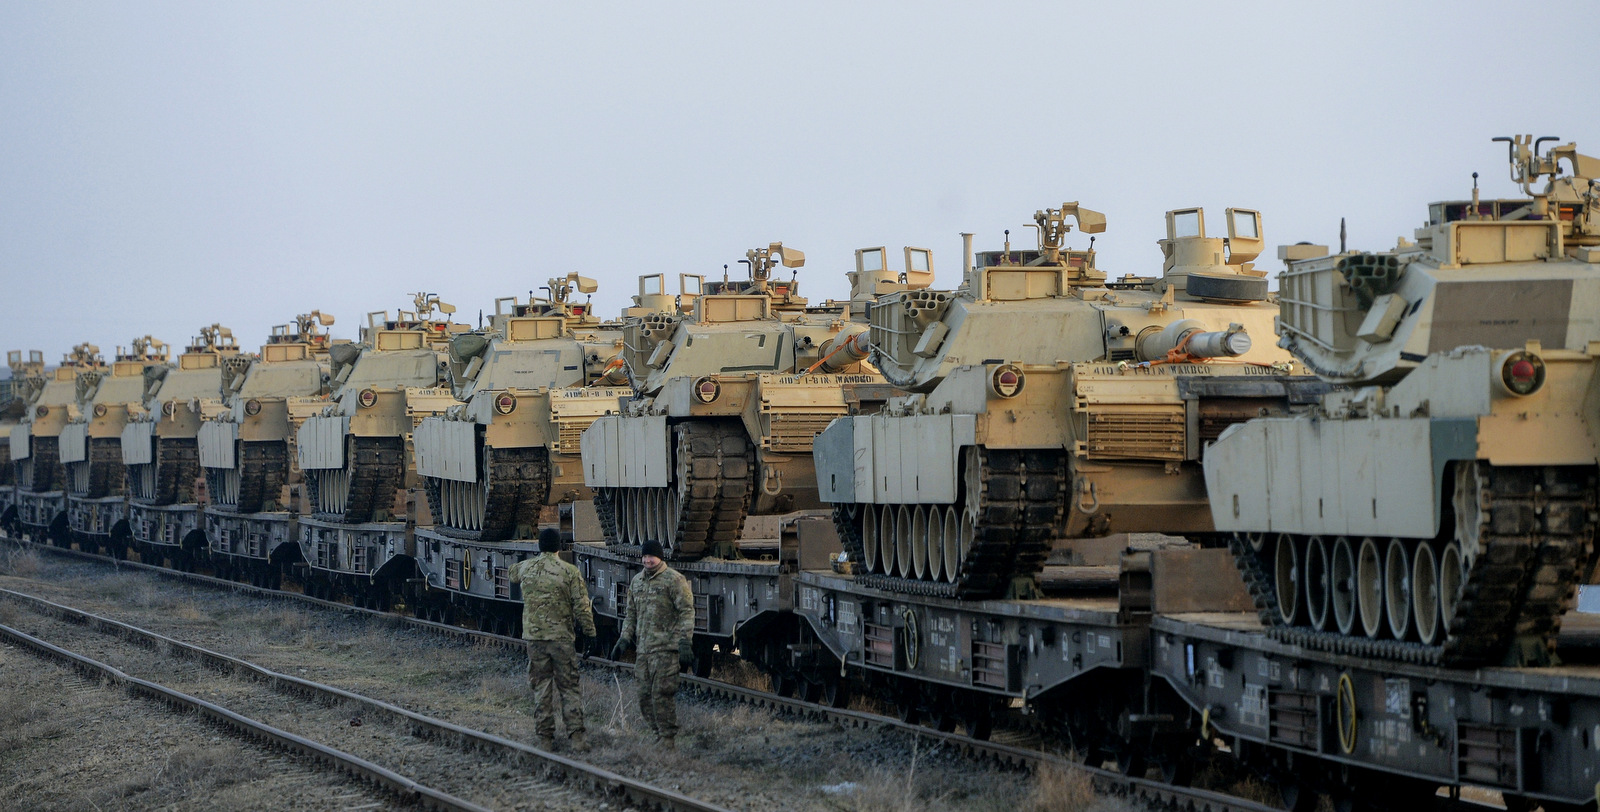 Servicemen of the "Fighting Eagles" 1st Battalion, 8th Infantry Regiment, walk by tanks that arrived via train to the US base in Mihail Kogalniceanu, eastern Romania, Tuesday, Feb. 14, 2017. (AP/Andreea Alexandru)